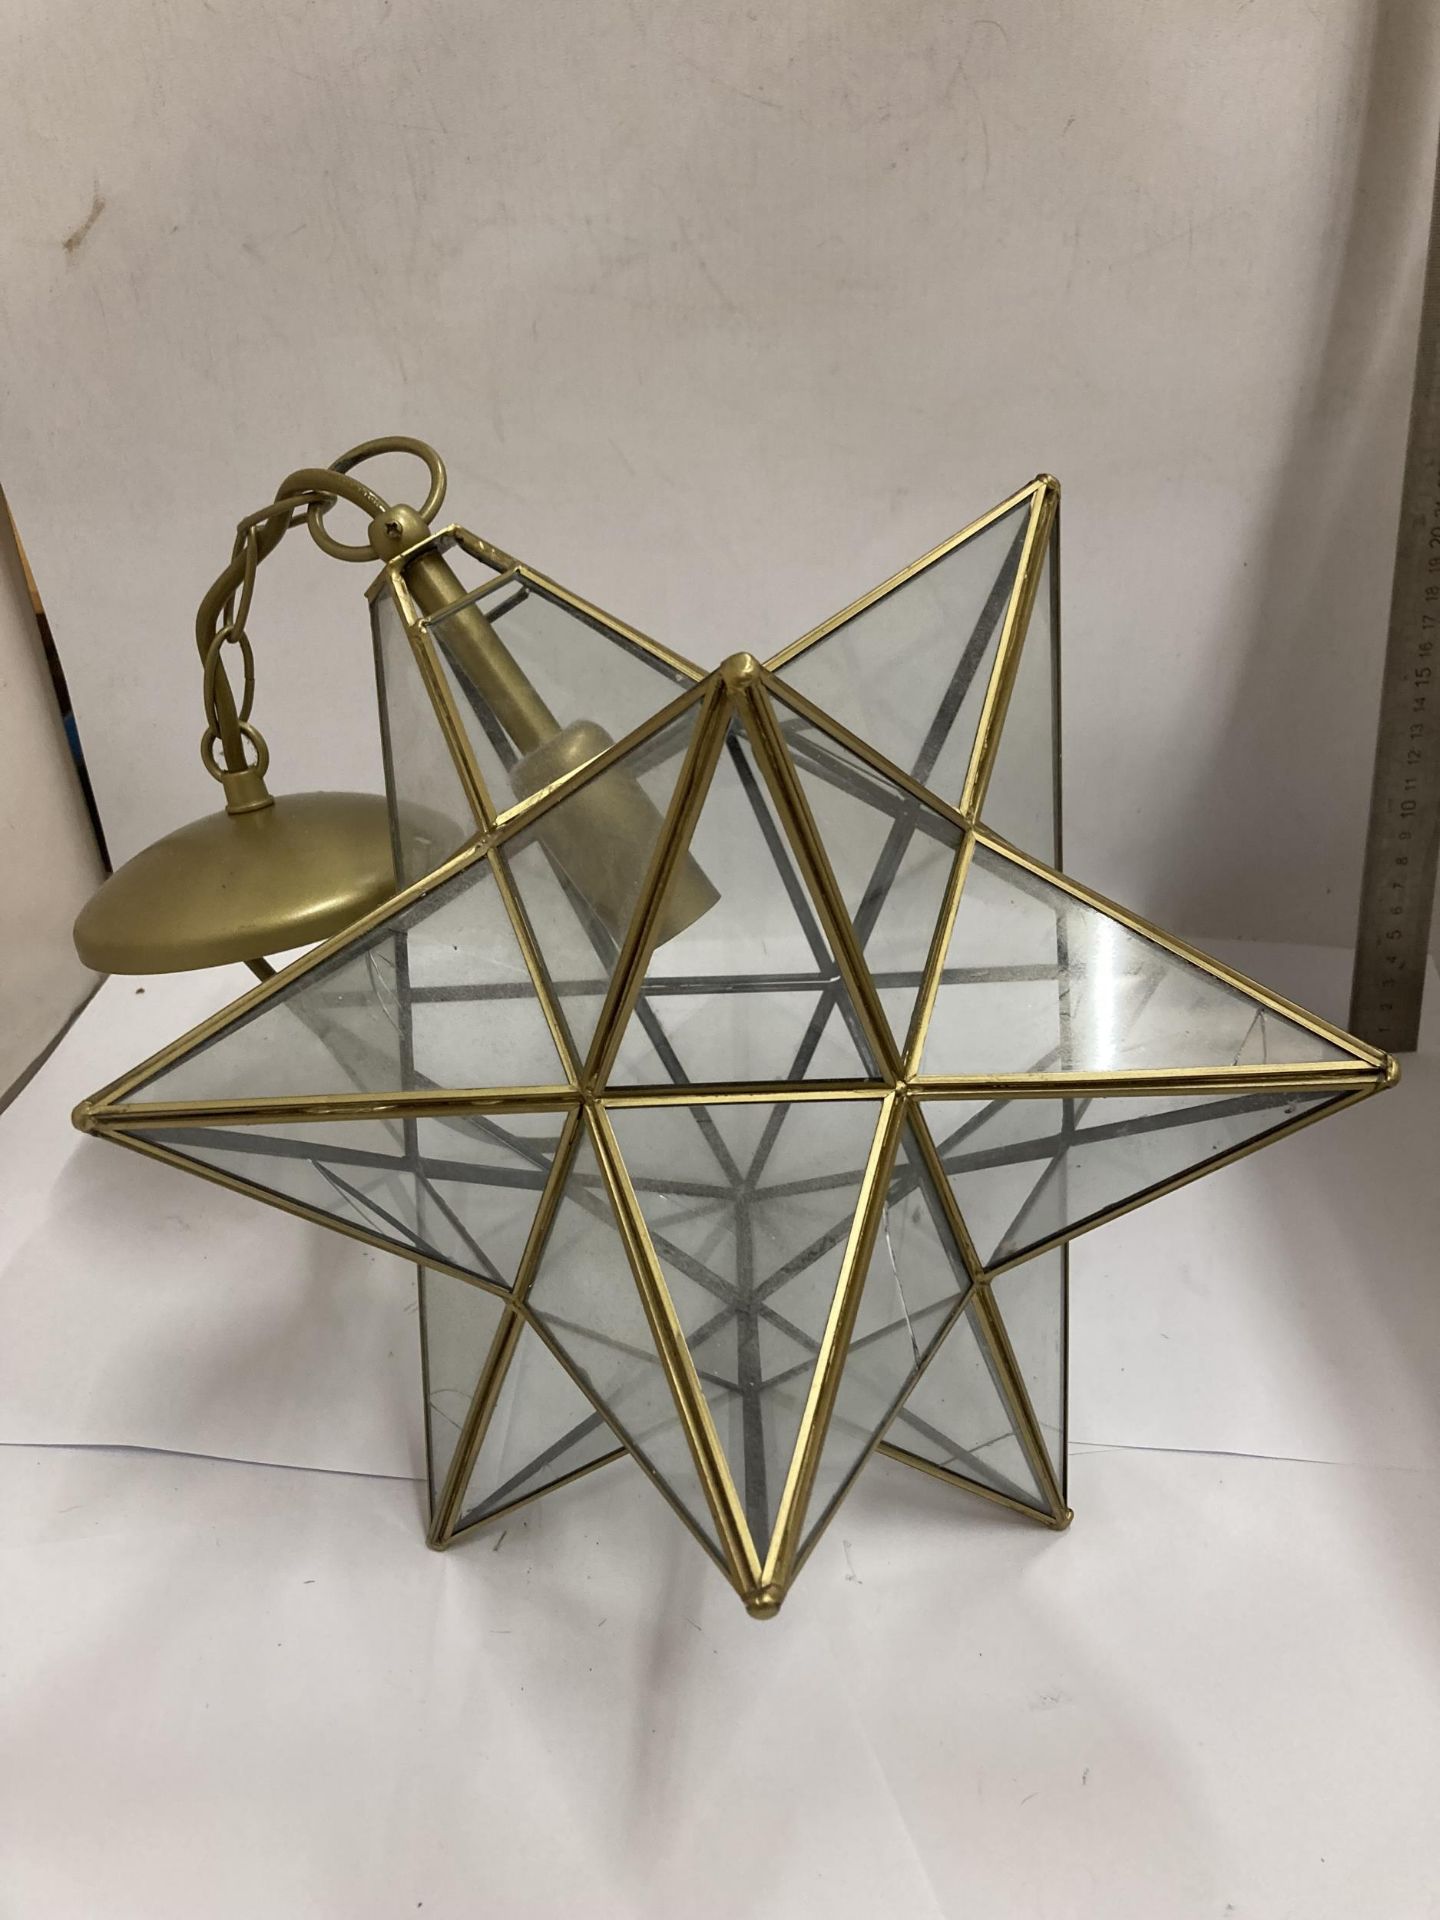 TWO GLASS STAR SHAPED CEILING LIGHT FITTINGS - Image 2 of 6